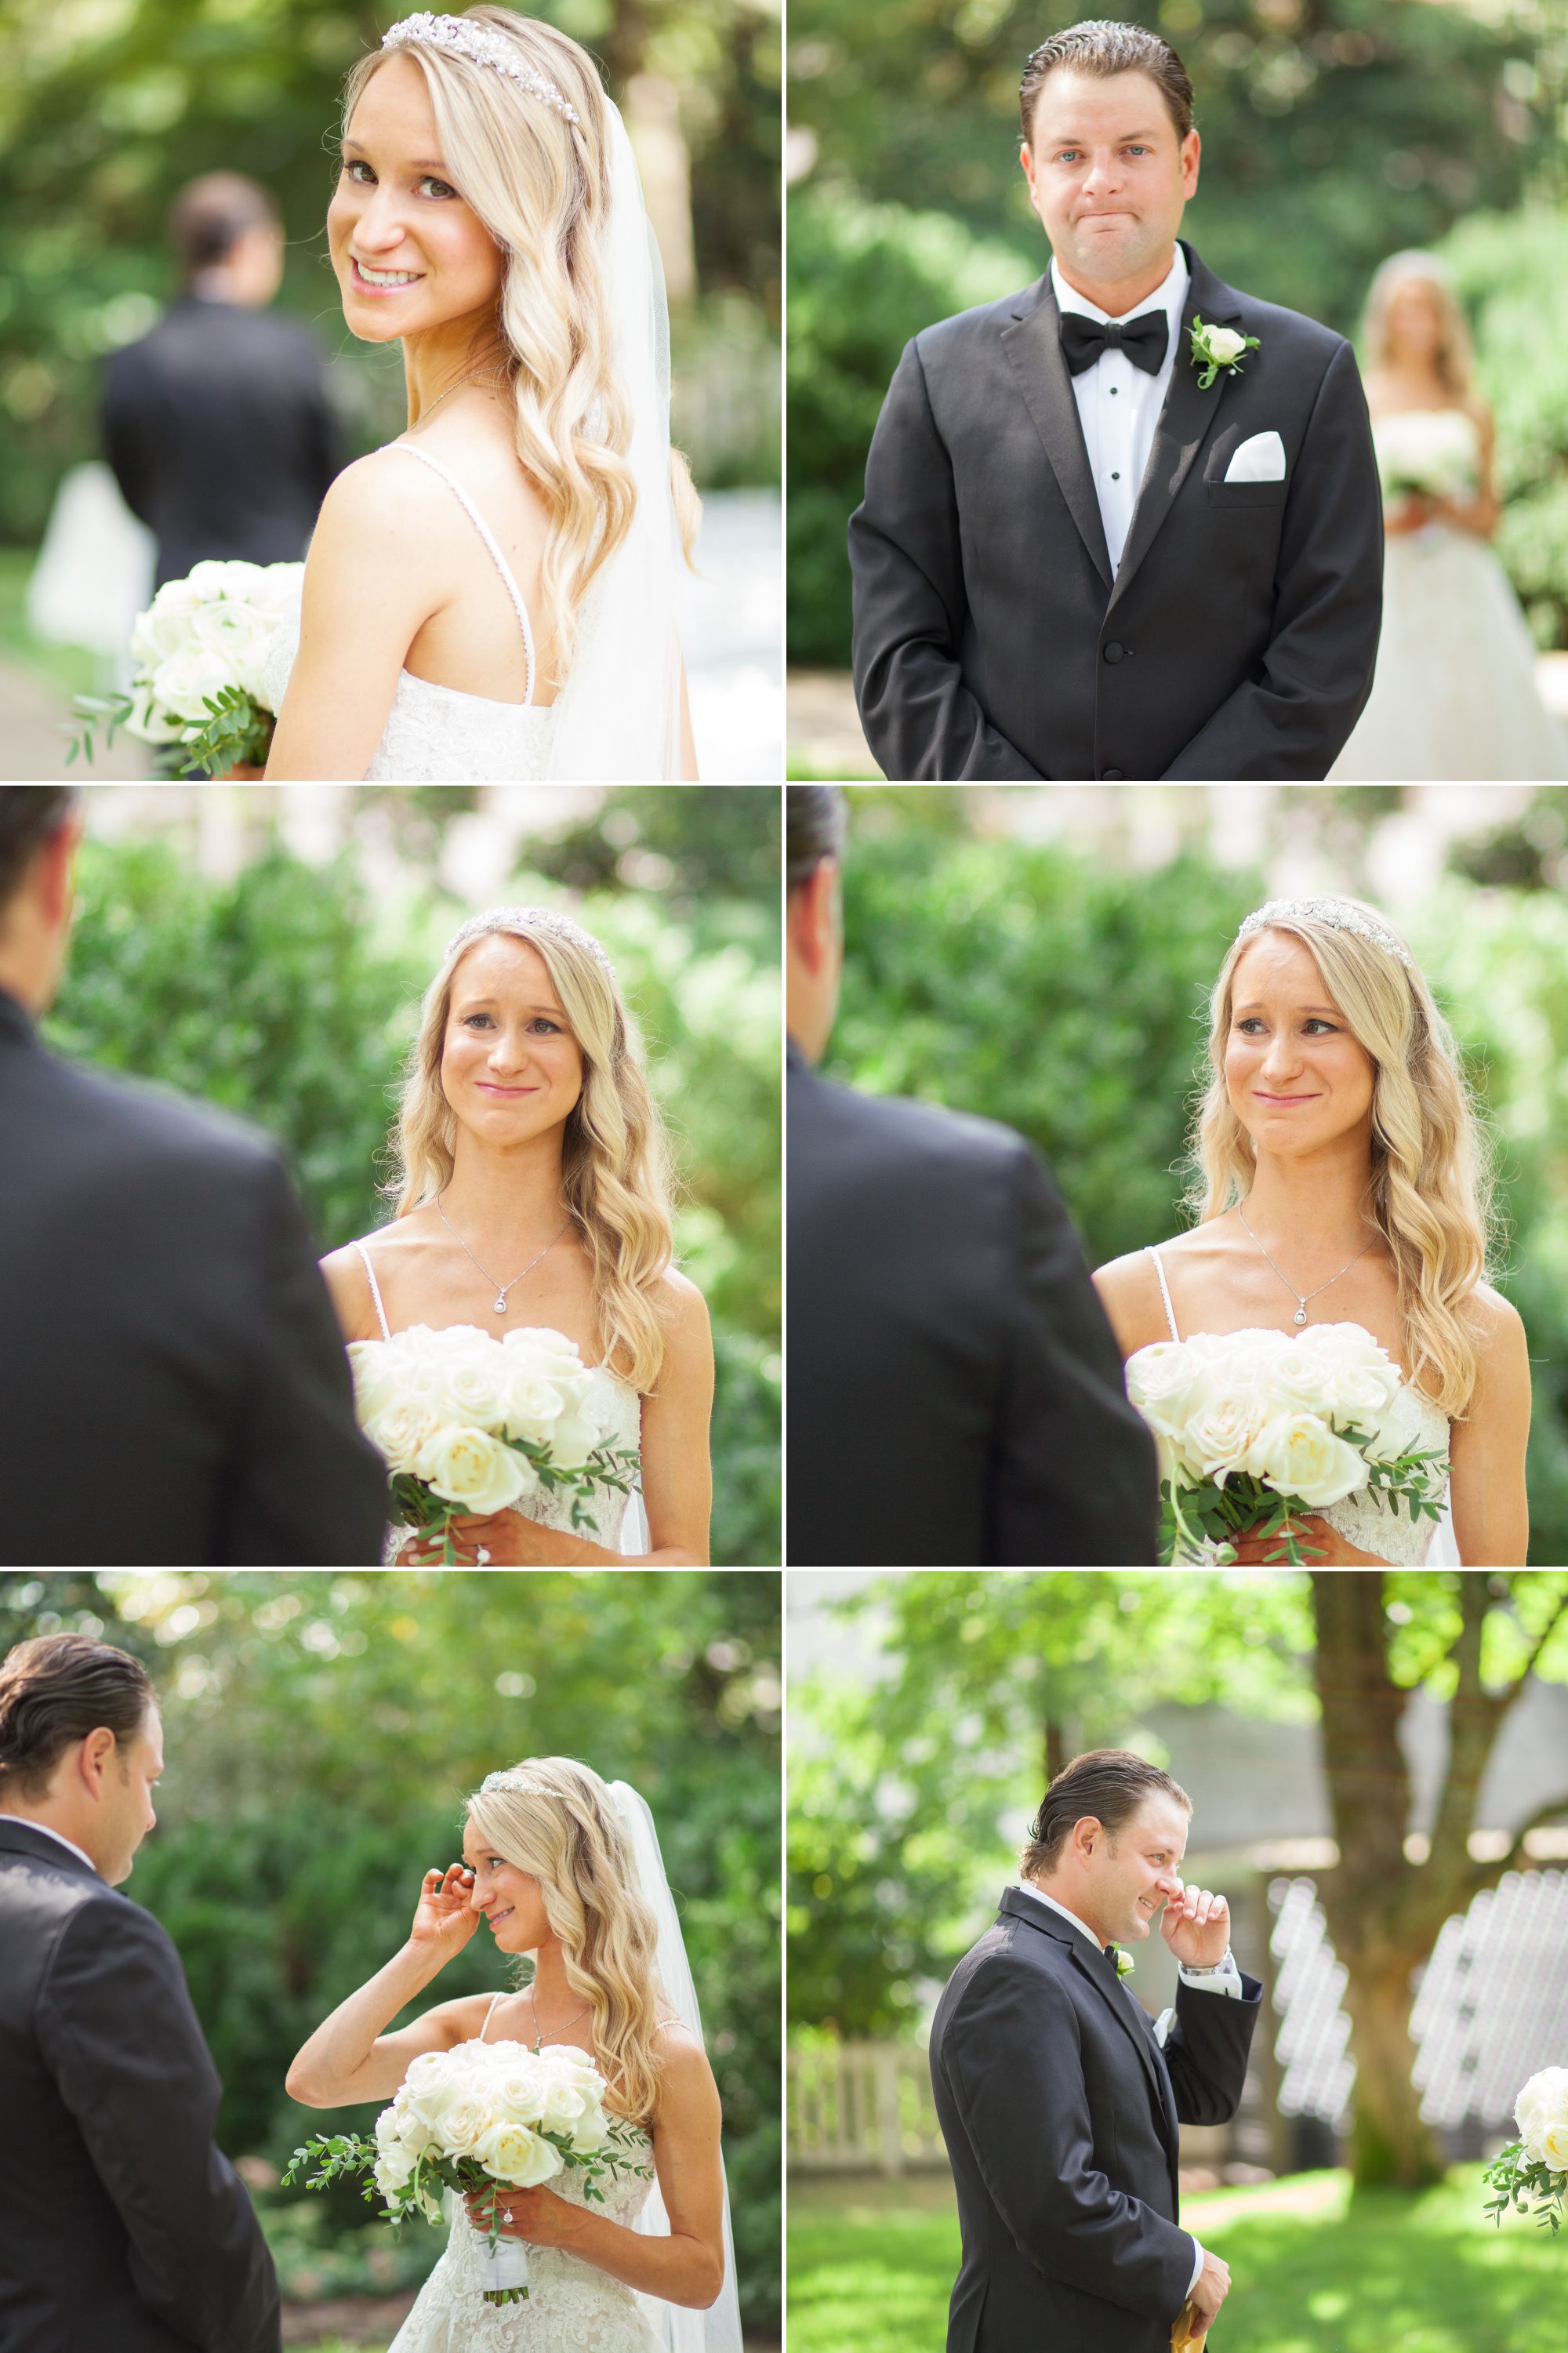 First look in the garden under the trees before wedding ceremony and reception at Belle Meade Plantation in Nashville, TN. Photos by Krista Lee Photography 